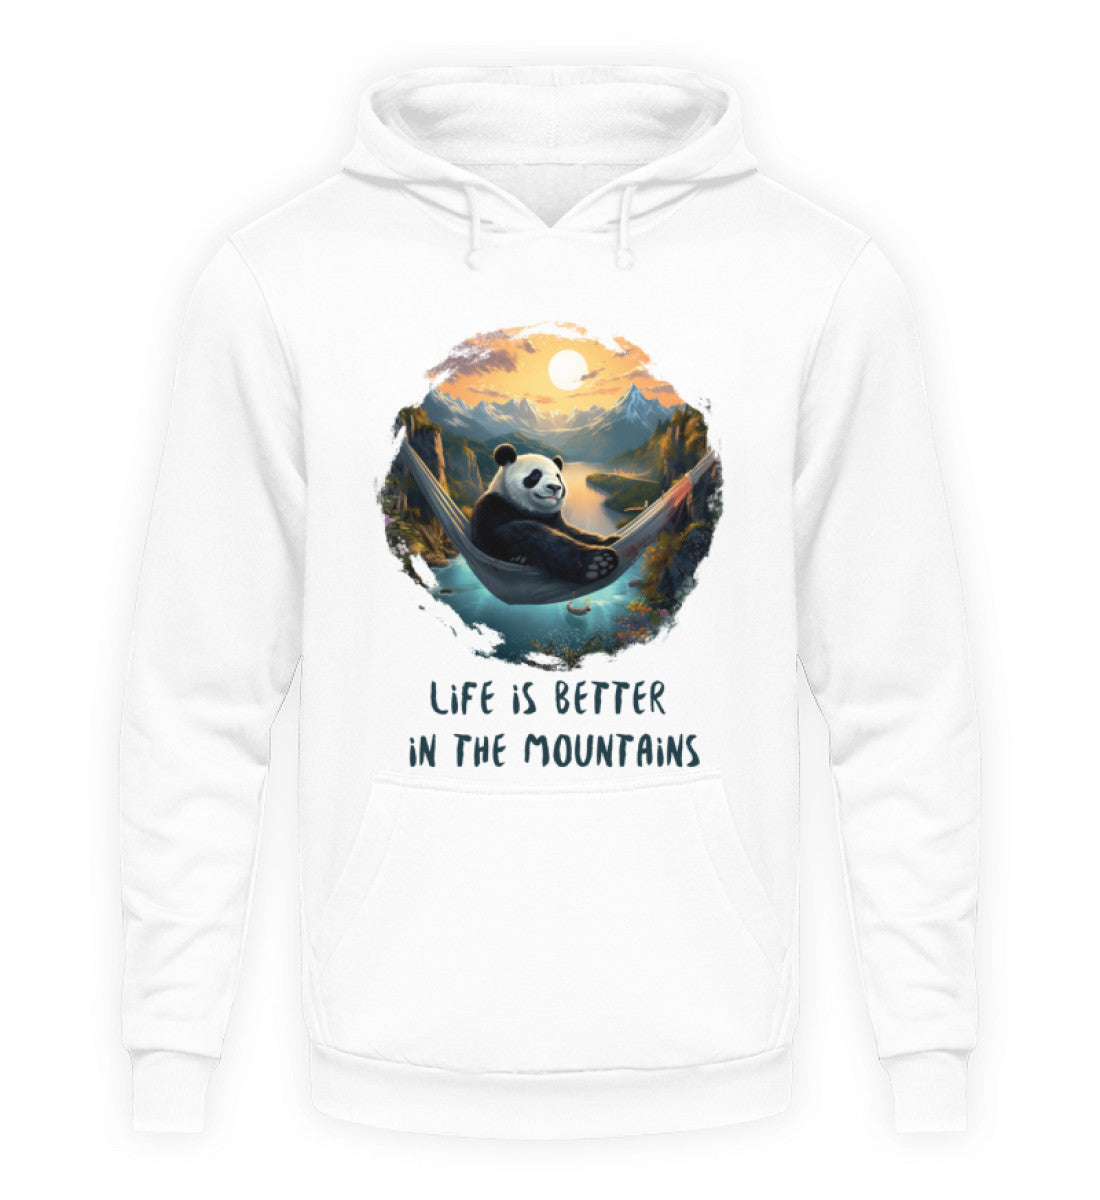 LIFE IS BETTER IN THE MOUNTAINS - Hoodie Unisex